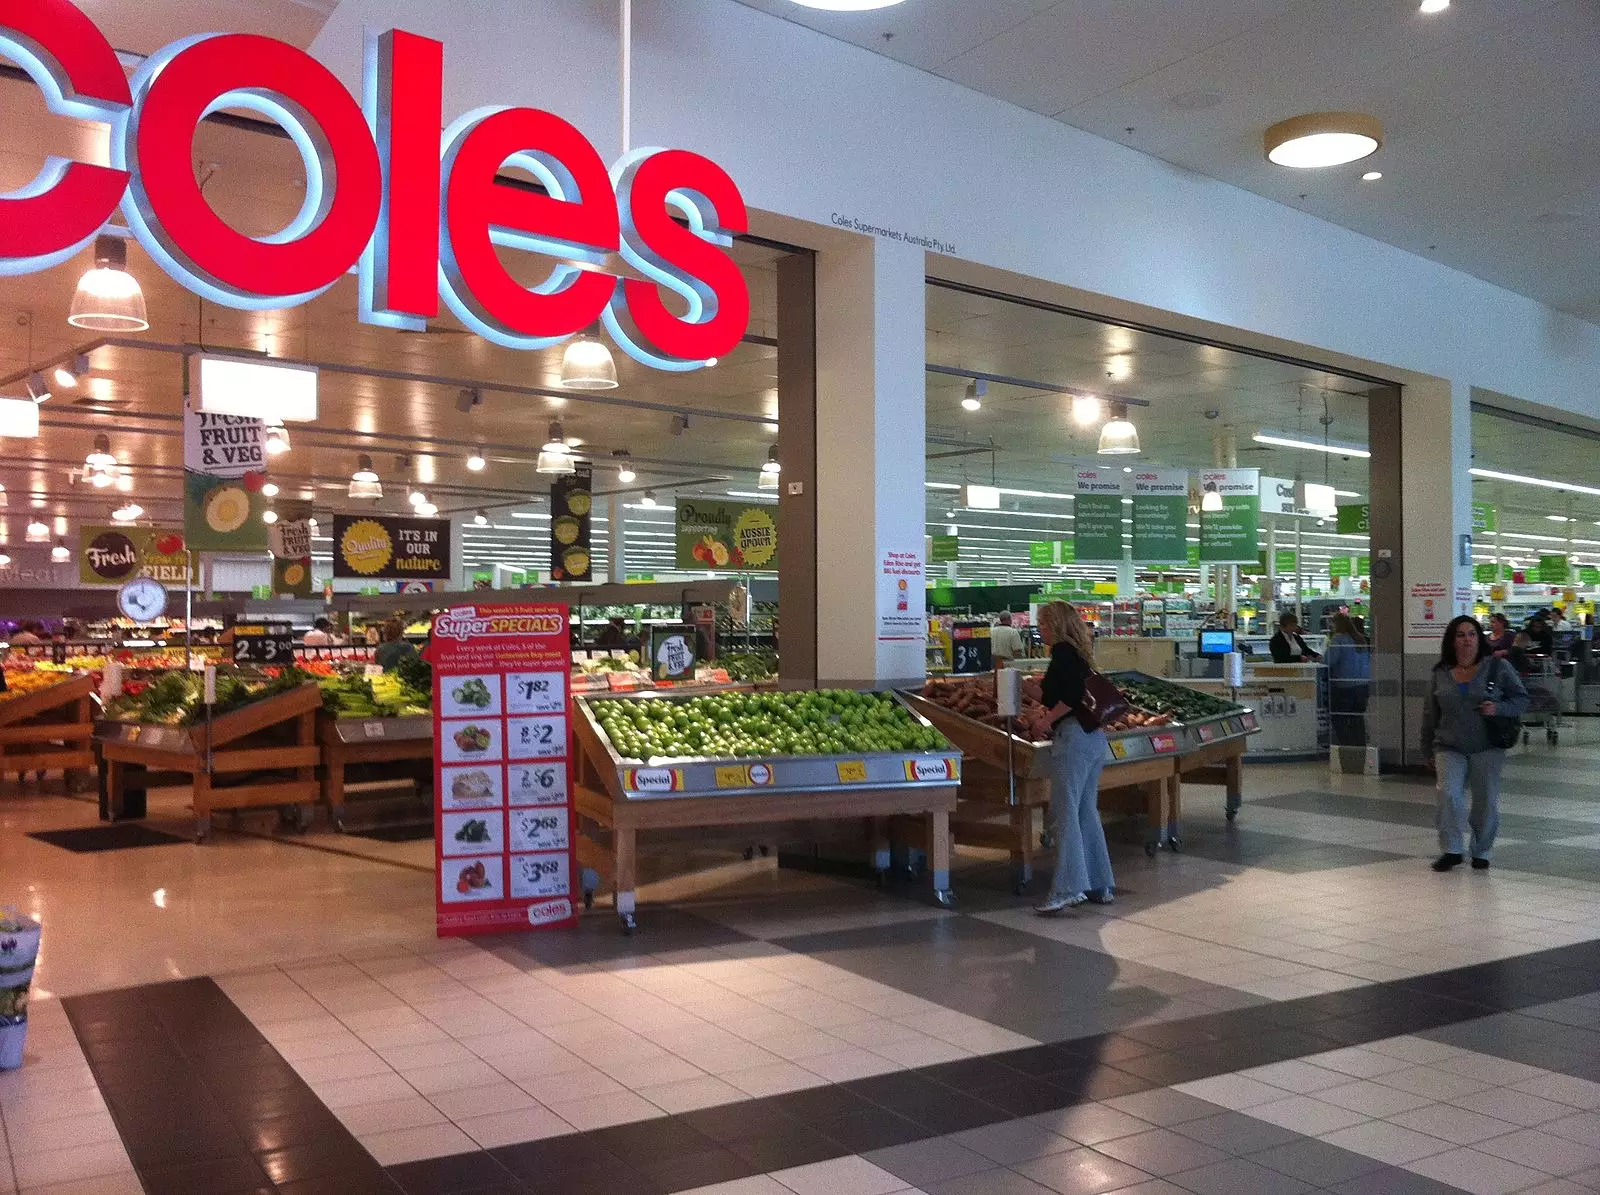 Stock image of Coles.